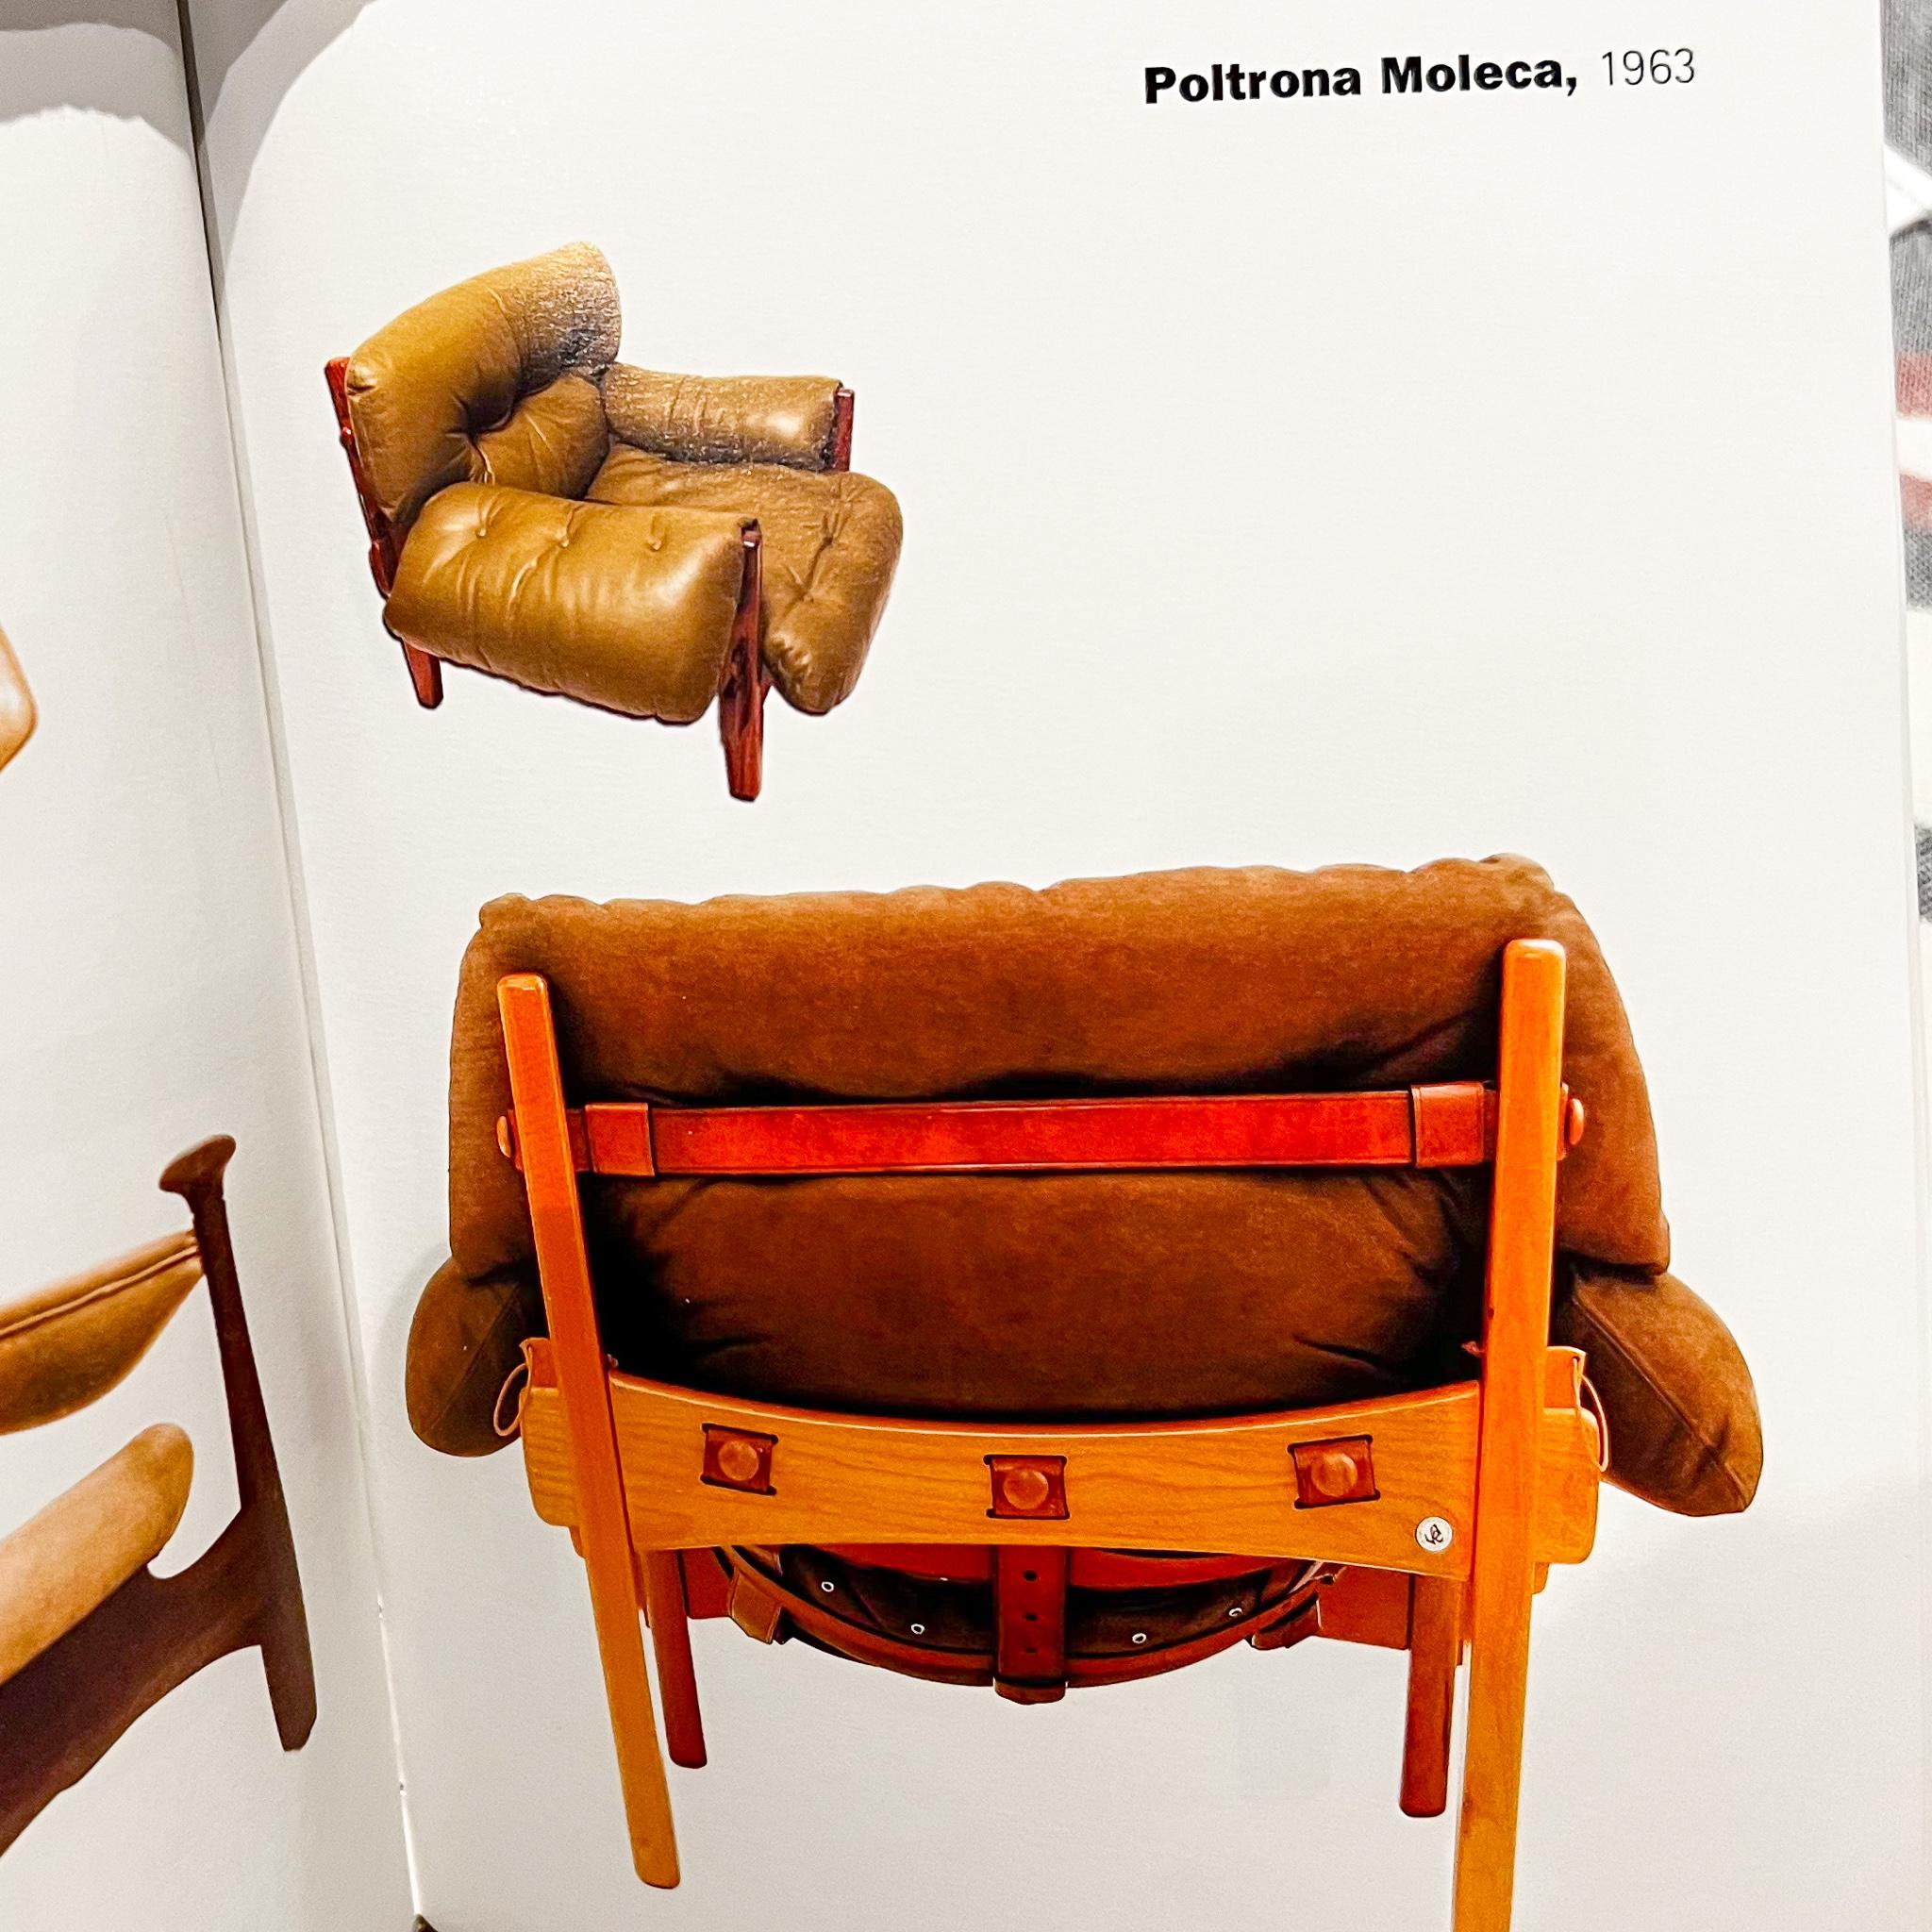 “Moleca” Lounge Chair with Stool in Hardwood & Leather, Sergio Rodrigues, Brazil For Sale 3